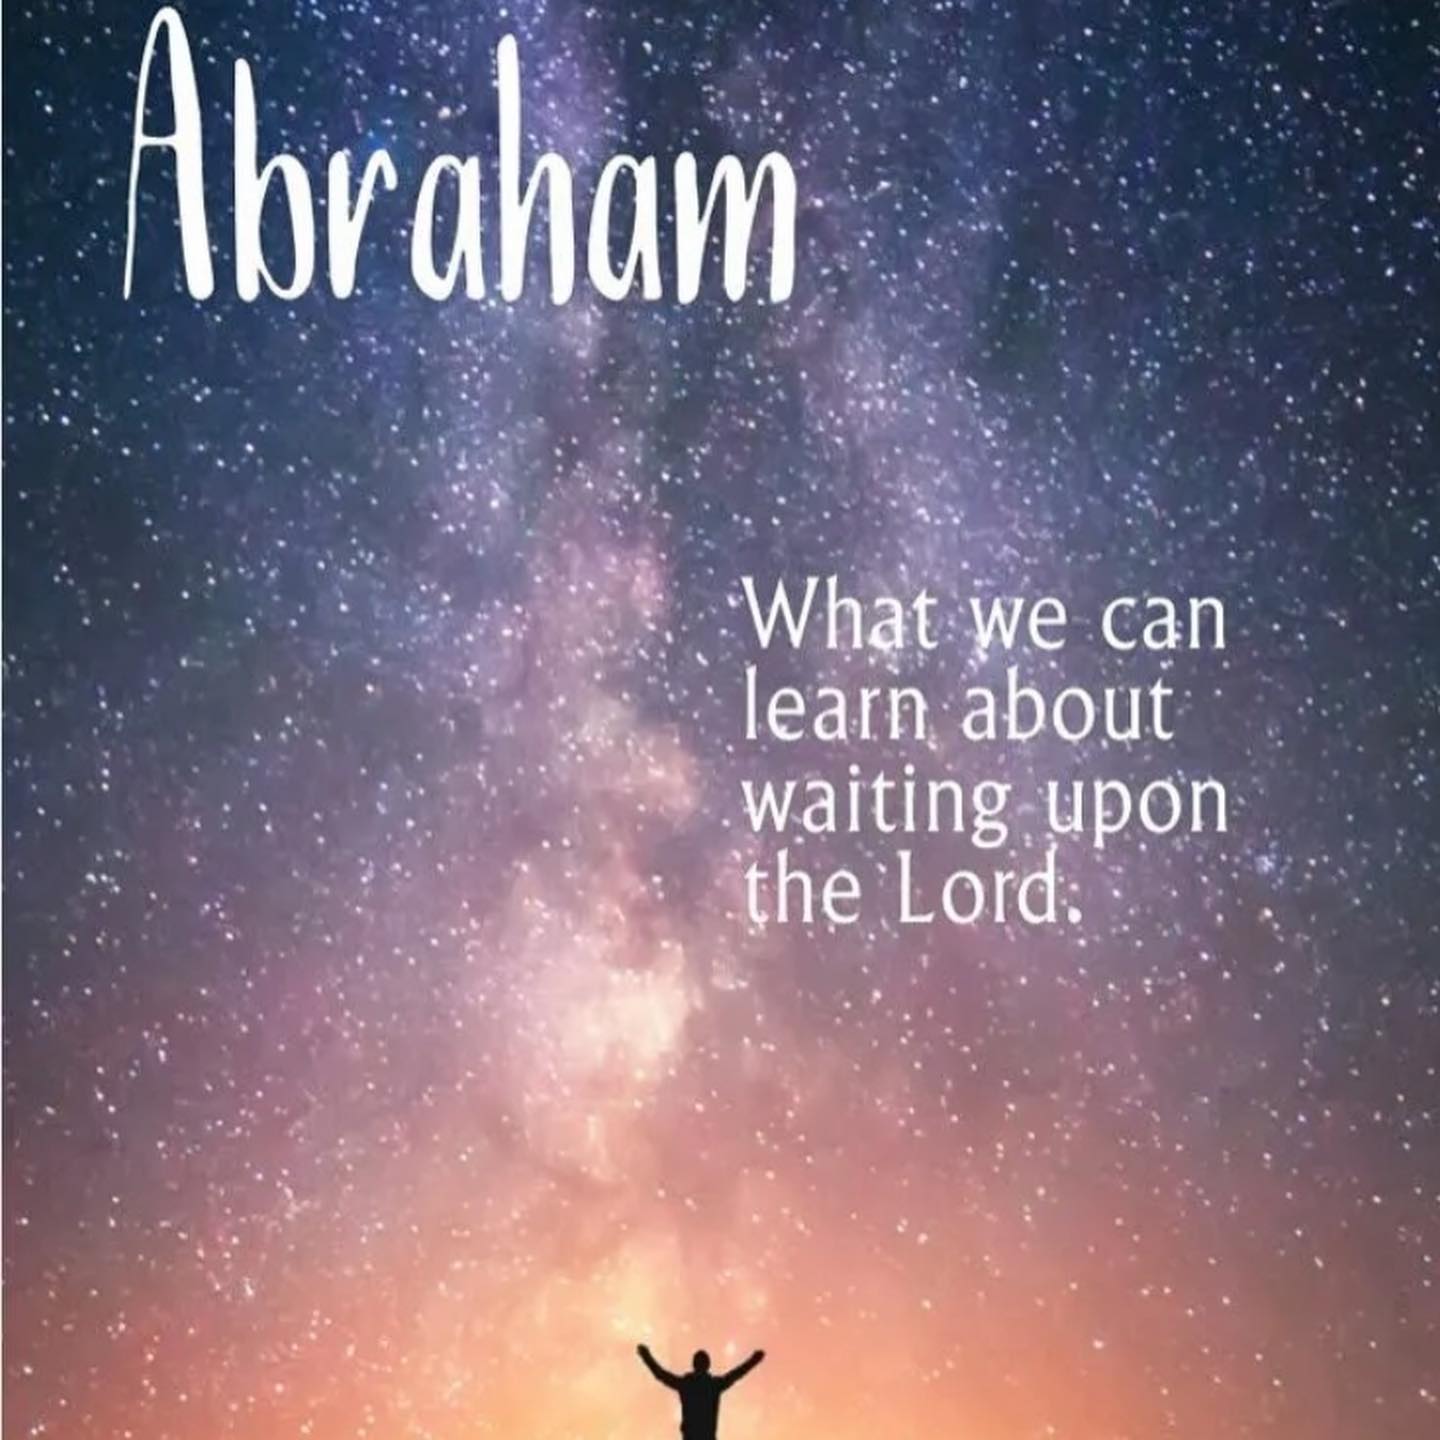 Abraham is central in both Old and New Testaments, known as a biblical patriarch and for his great faith. But did you know Abraham didn’t learn to walk by faith till he was an old, old man? The Bible doesn’t beat around the bush - we’re told the ugly truth about humanity which always points us to why we need Jesus Christ our Lord and Savior. Abraham (first Abram) began as a idol worshiper with family drama. Yet six times, God said to him, “I will”. God’s promises inspired ol’ Abram to step out in faith!Join us Sunday, 10AM @fallbrookvineyardchurch as Katy Smith will be teaching us from Genesis chapters 12 and 13 Bring your friends, chairs and bibles. #abraham#promisesofgod#fatherofnations#allscriptureisrelevant#jesus#thewaythetruththelife#thebible#worship#prayer #repentance#revival#lifeabundant#community #support #love#familyofgod #outdoorchurch #organicchurch #outlawchurch #dogfriendlychurch#thevineyard1924